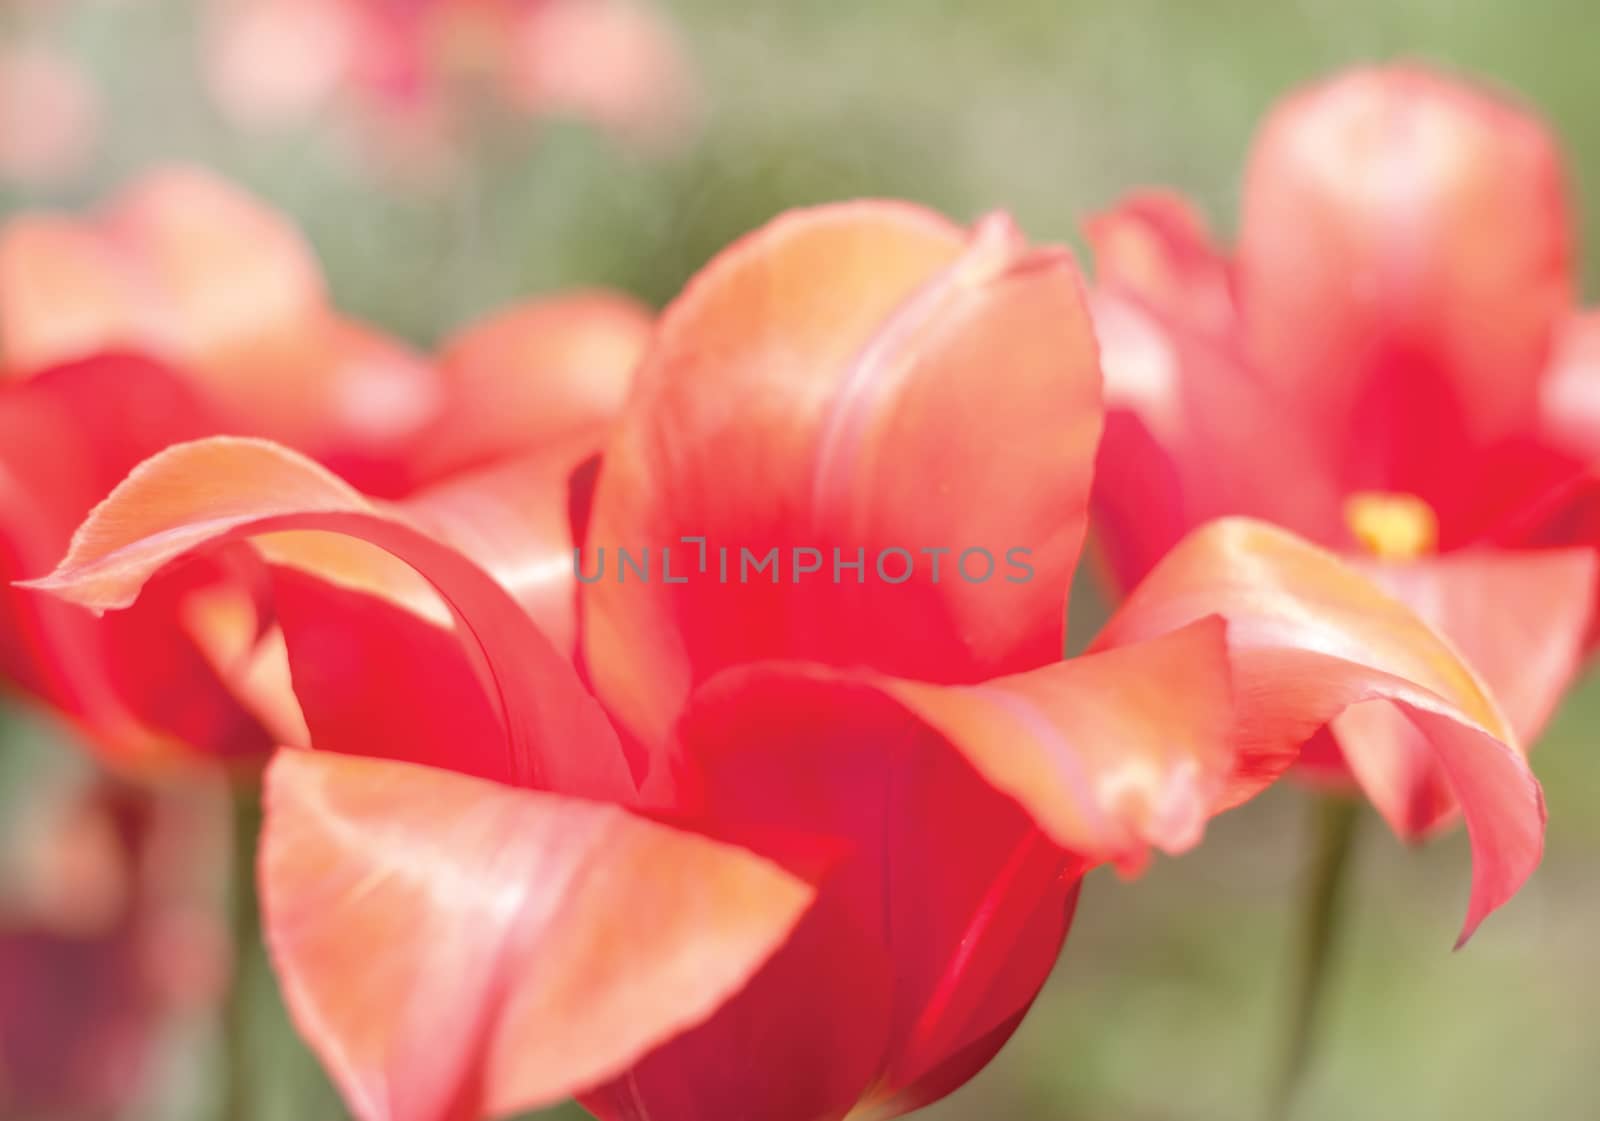 Red tulips on a solar glade